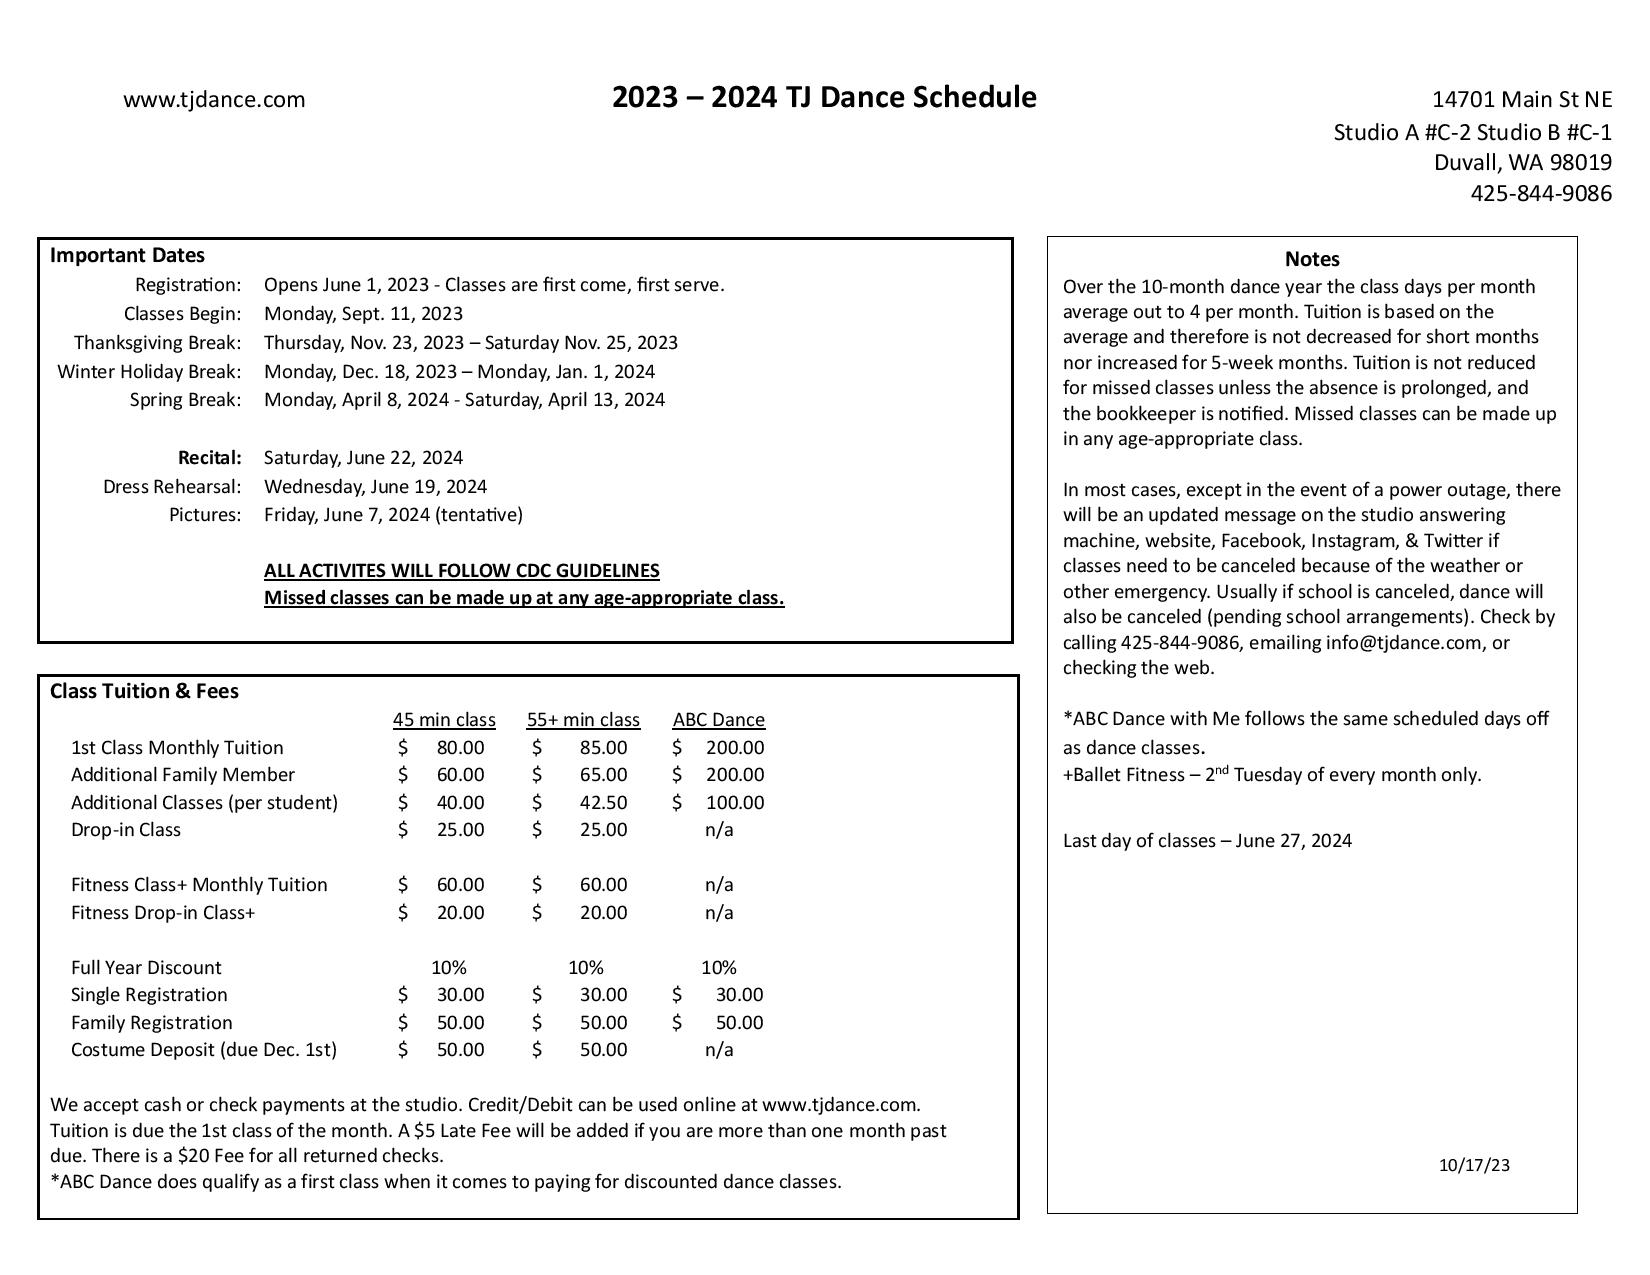 TJ-Dance-Schedule-2023-2024-10-17-23-full-added-PR-added-page-002-1